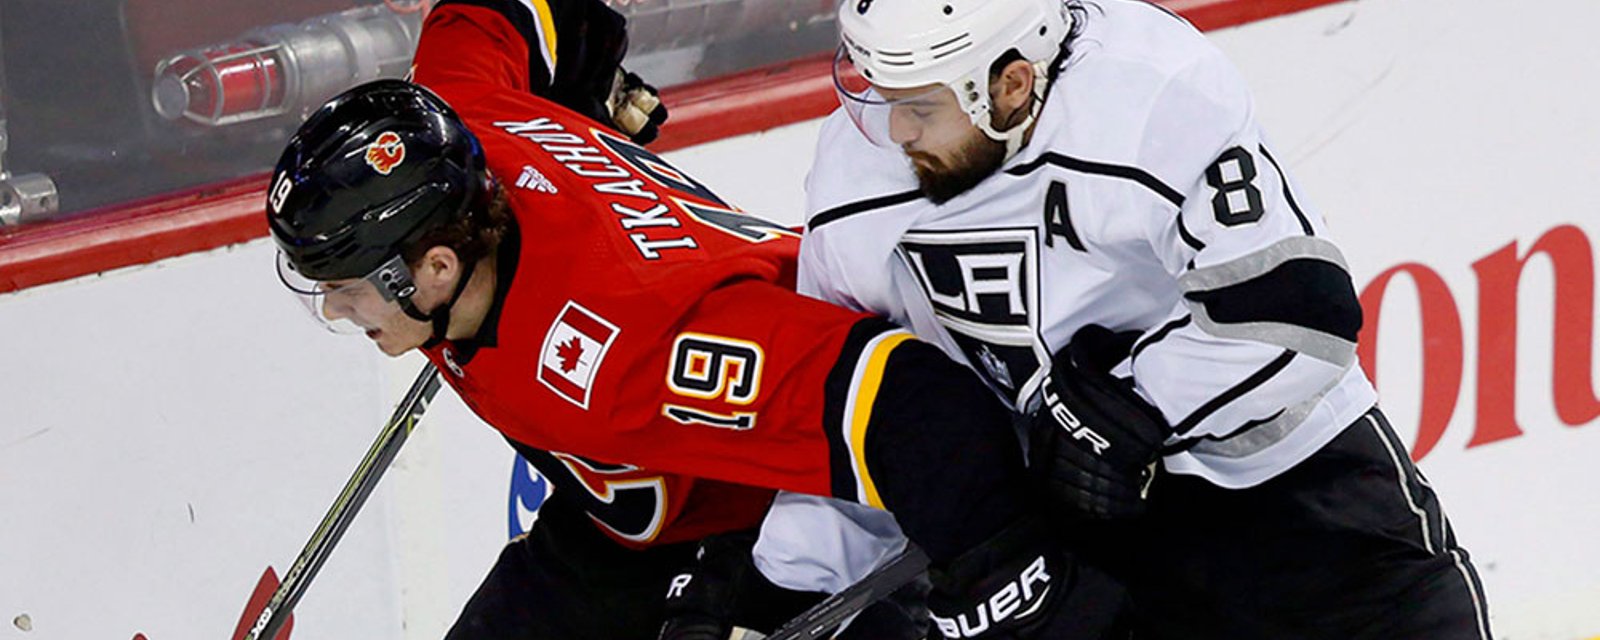 Drew Doughty fires a shot at Matthew Tkachuk ahead of Kings and Flames game